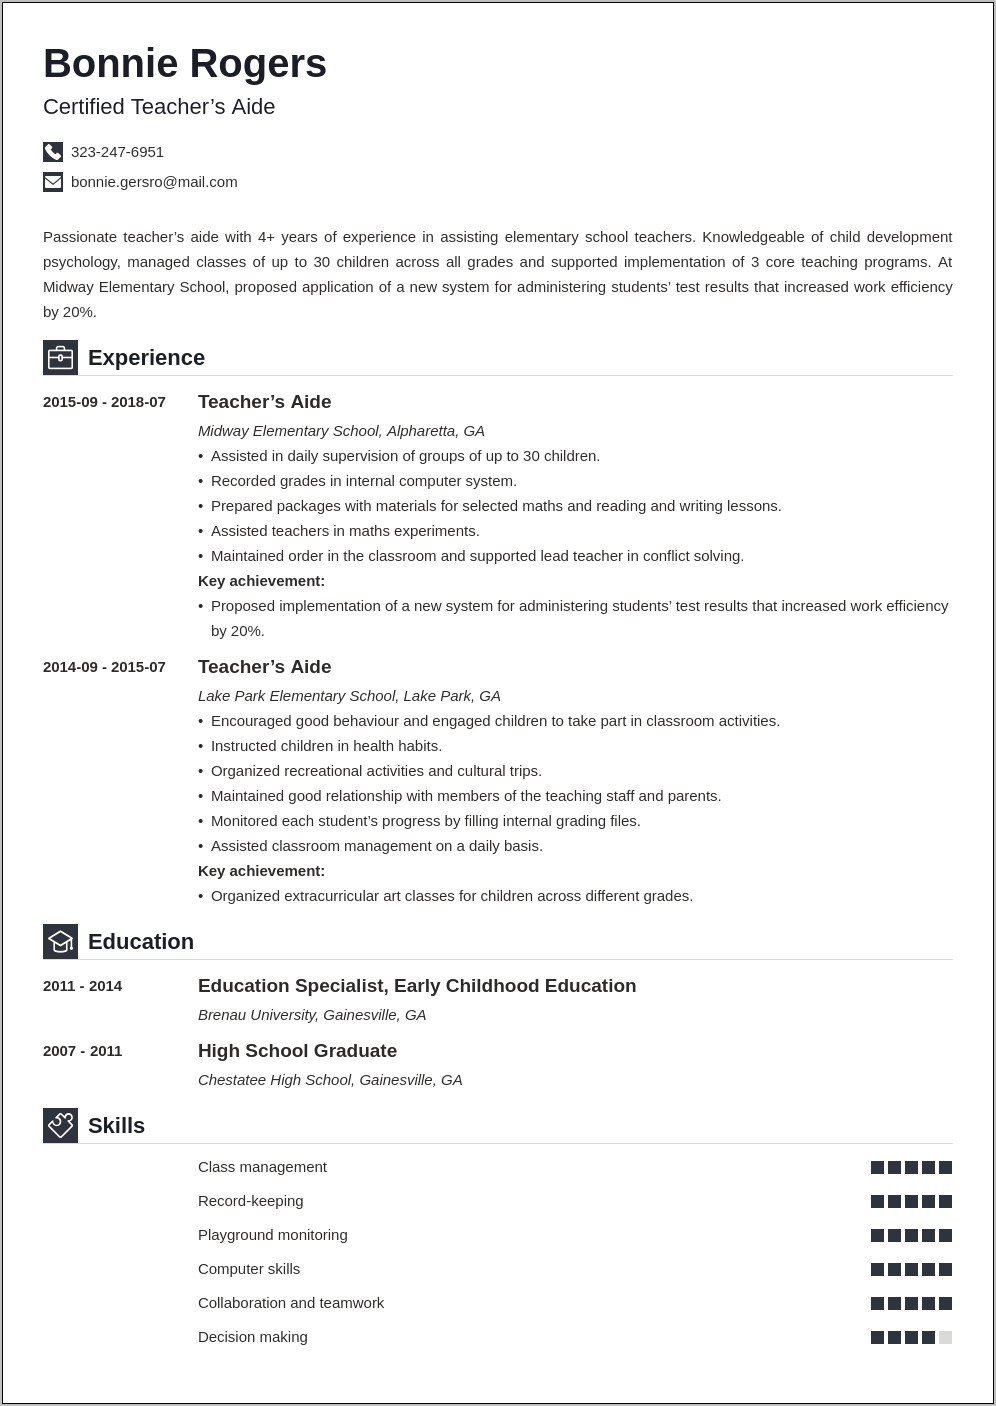 Sample Resume For Instructional Systems Specialist